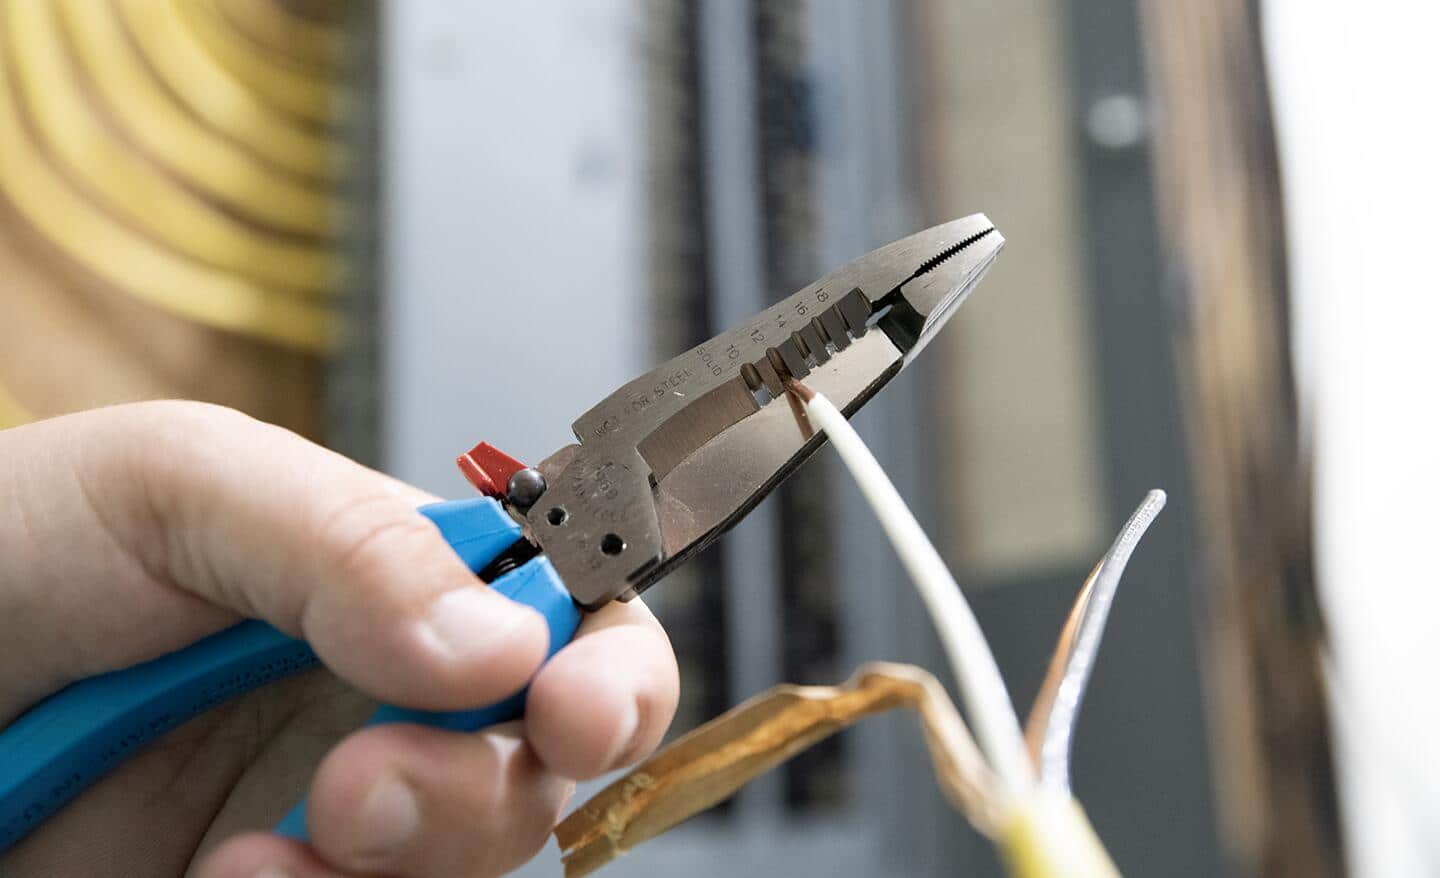 A person uses a pair of wire cutters to cut electrical wire.